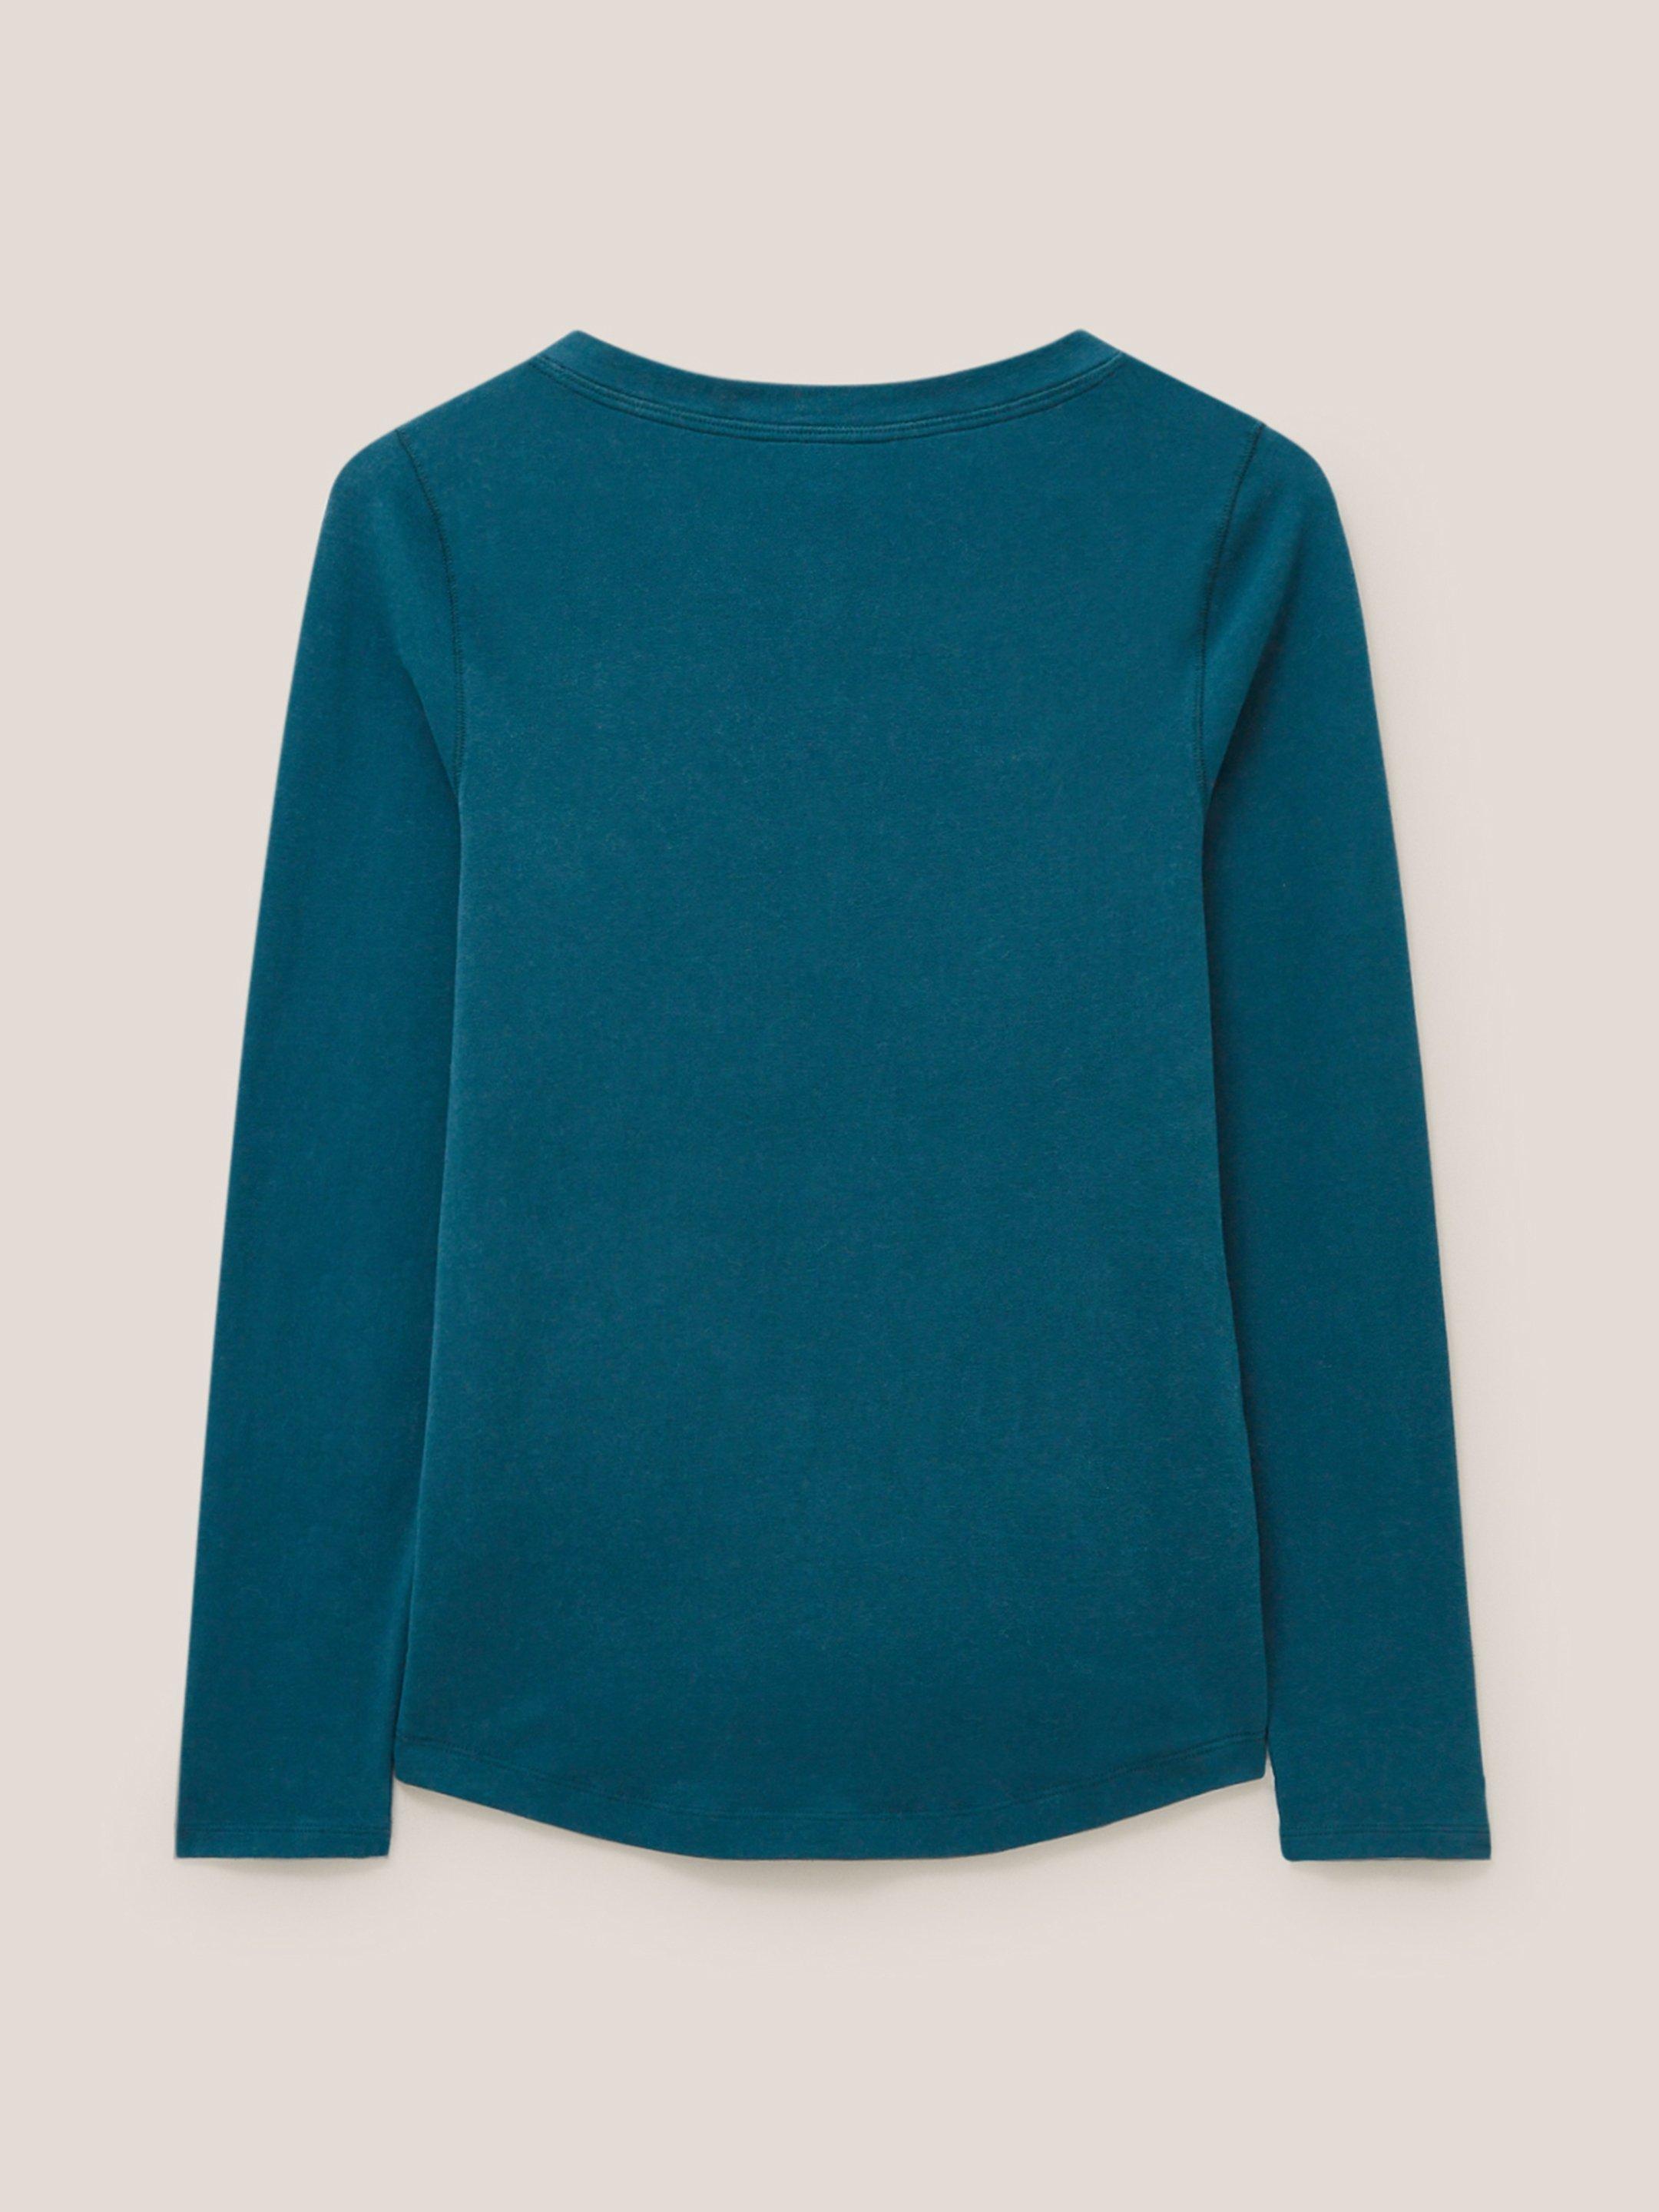 Hailey Henley PJ Top in MID TEAL - FLAT BACK